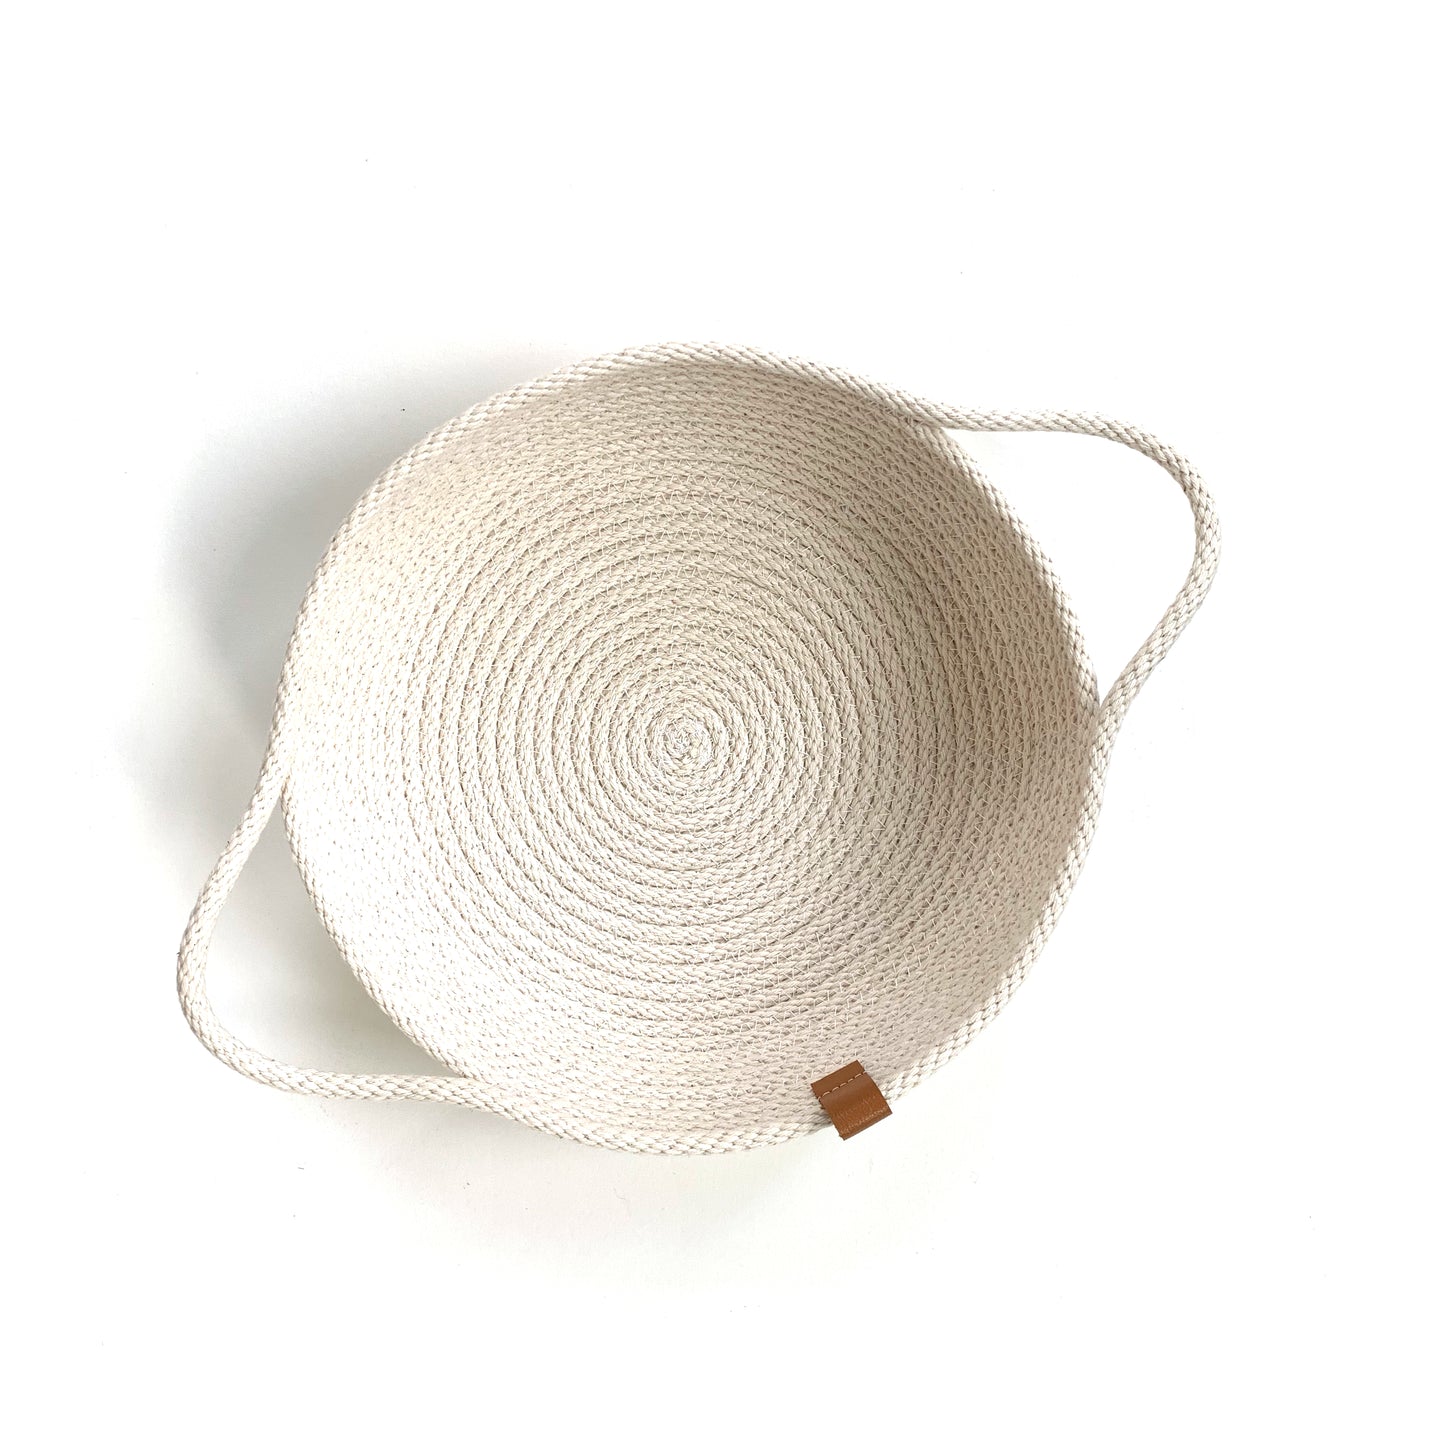 Made in Canada woven white cotton catch all bread basket.